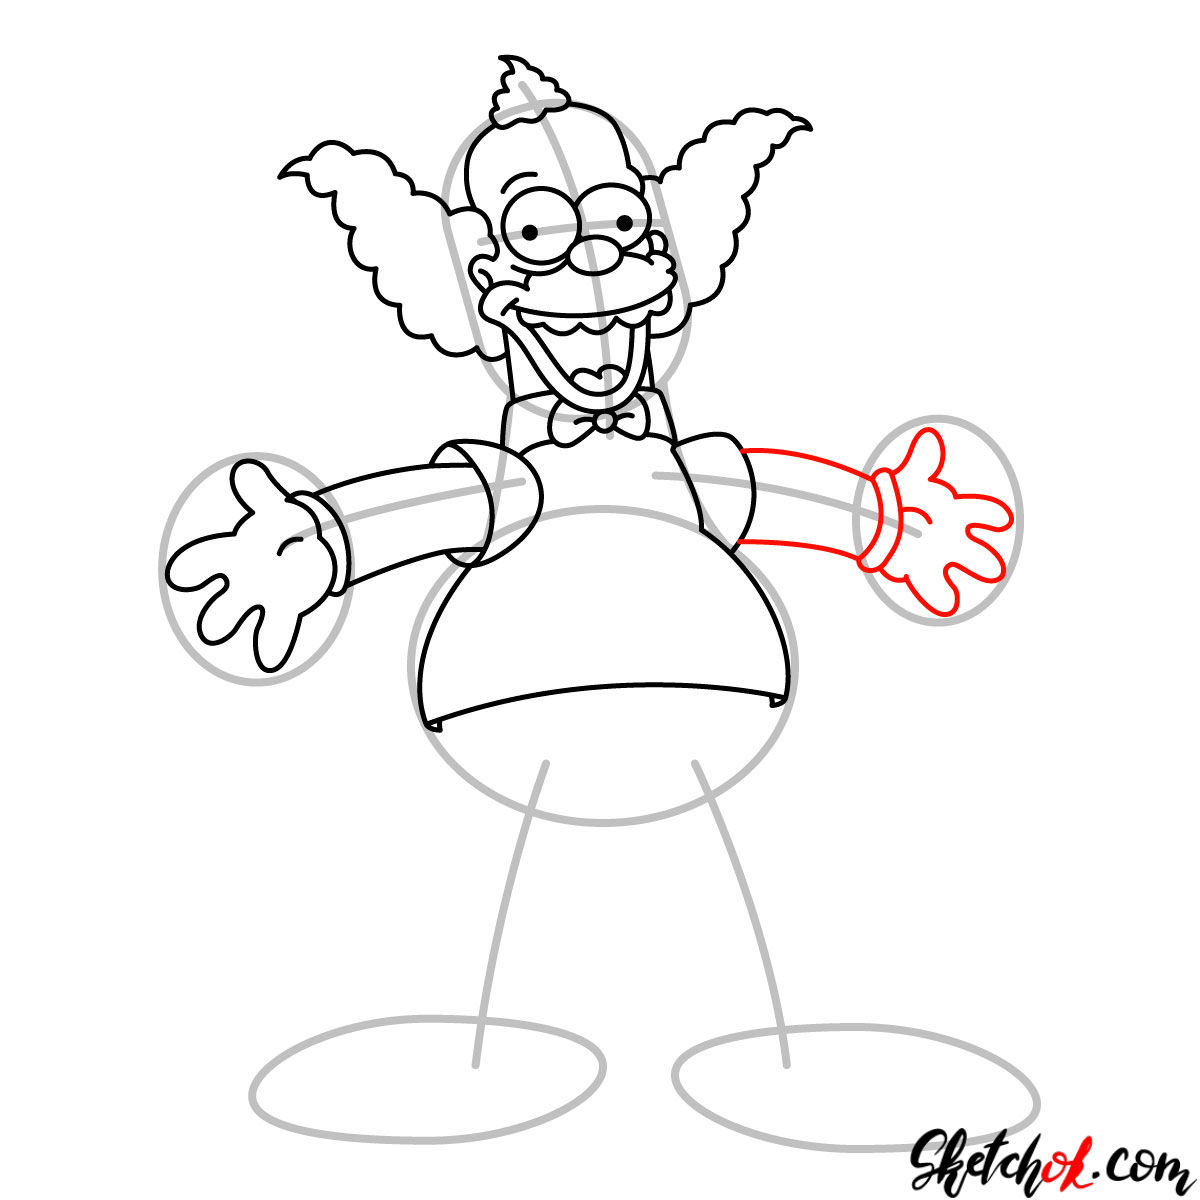 How to draw Krusty the Clown - step 09.